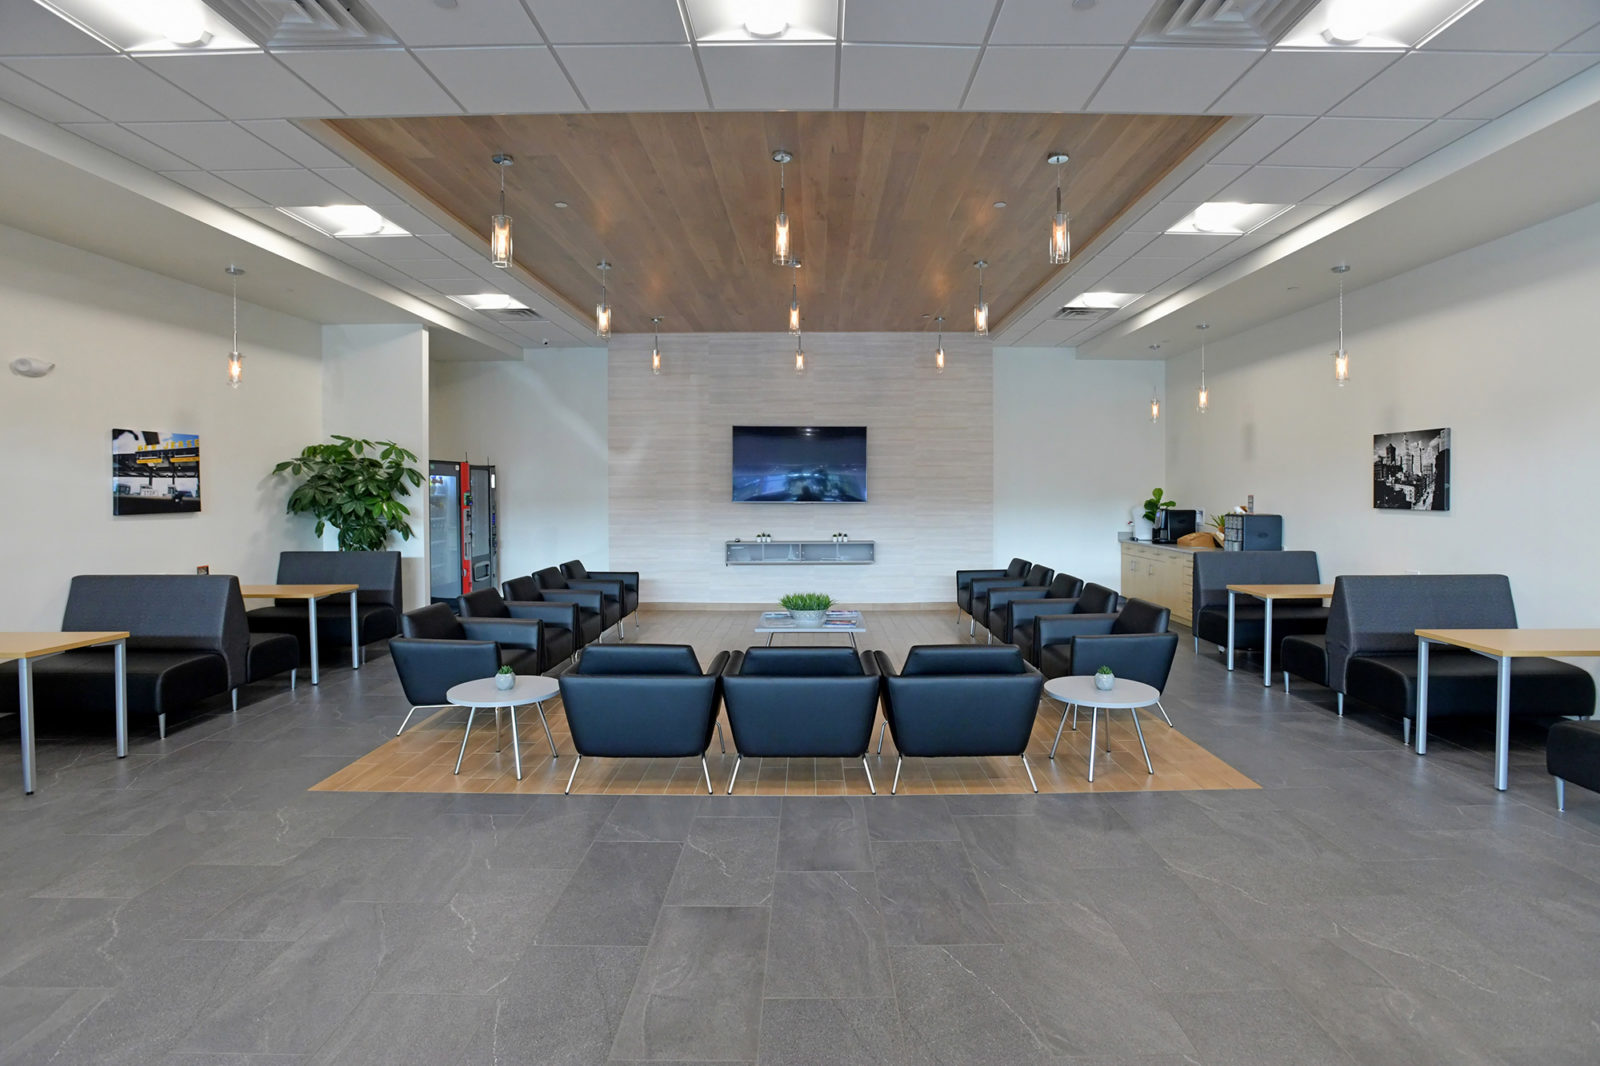 Waiting area of car dealership. Booths and tables line the outer walls and single black leather club chairs form a U-shape area in the center of the room.